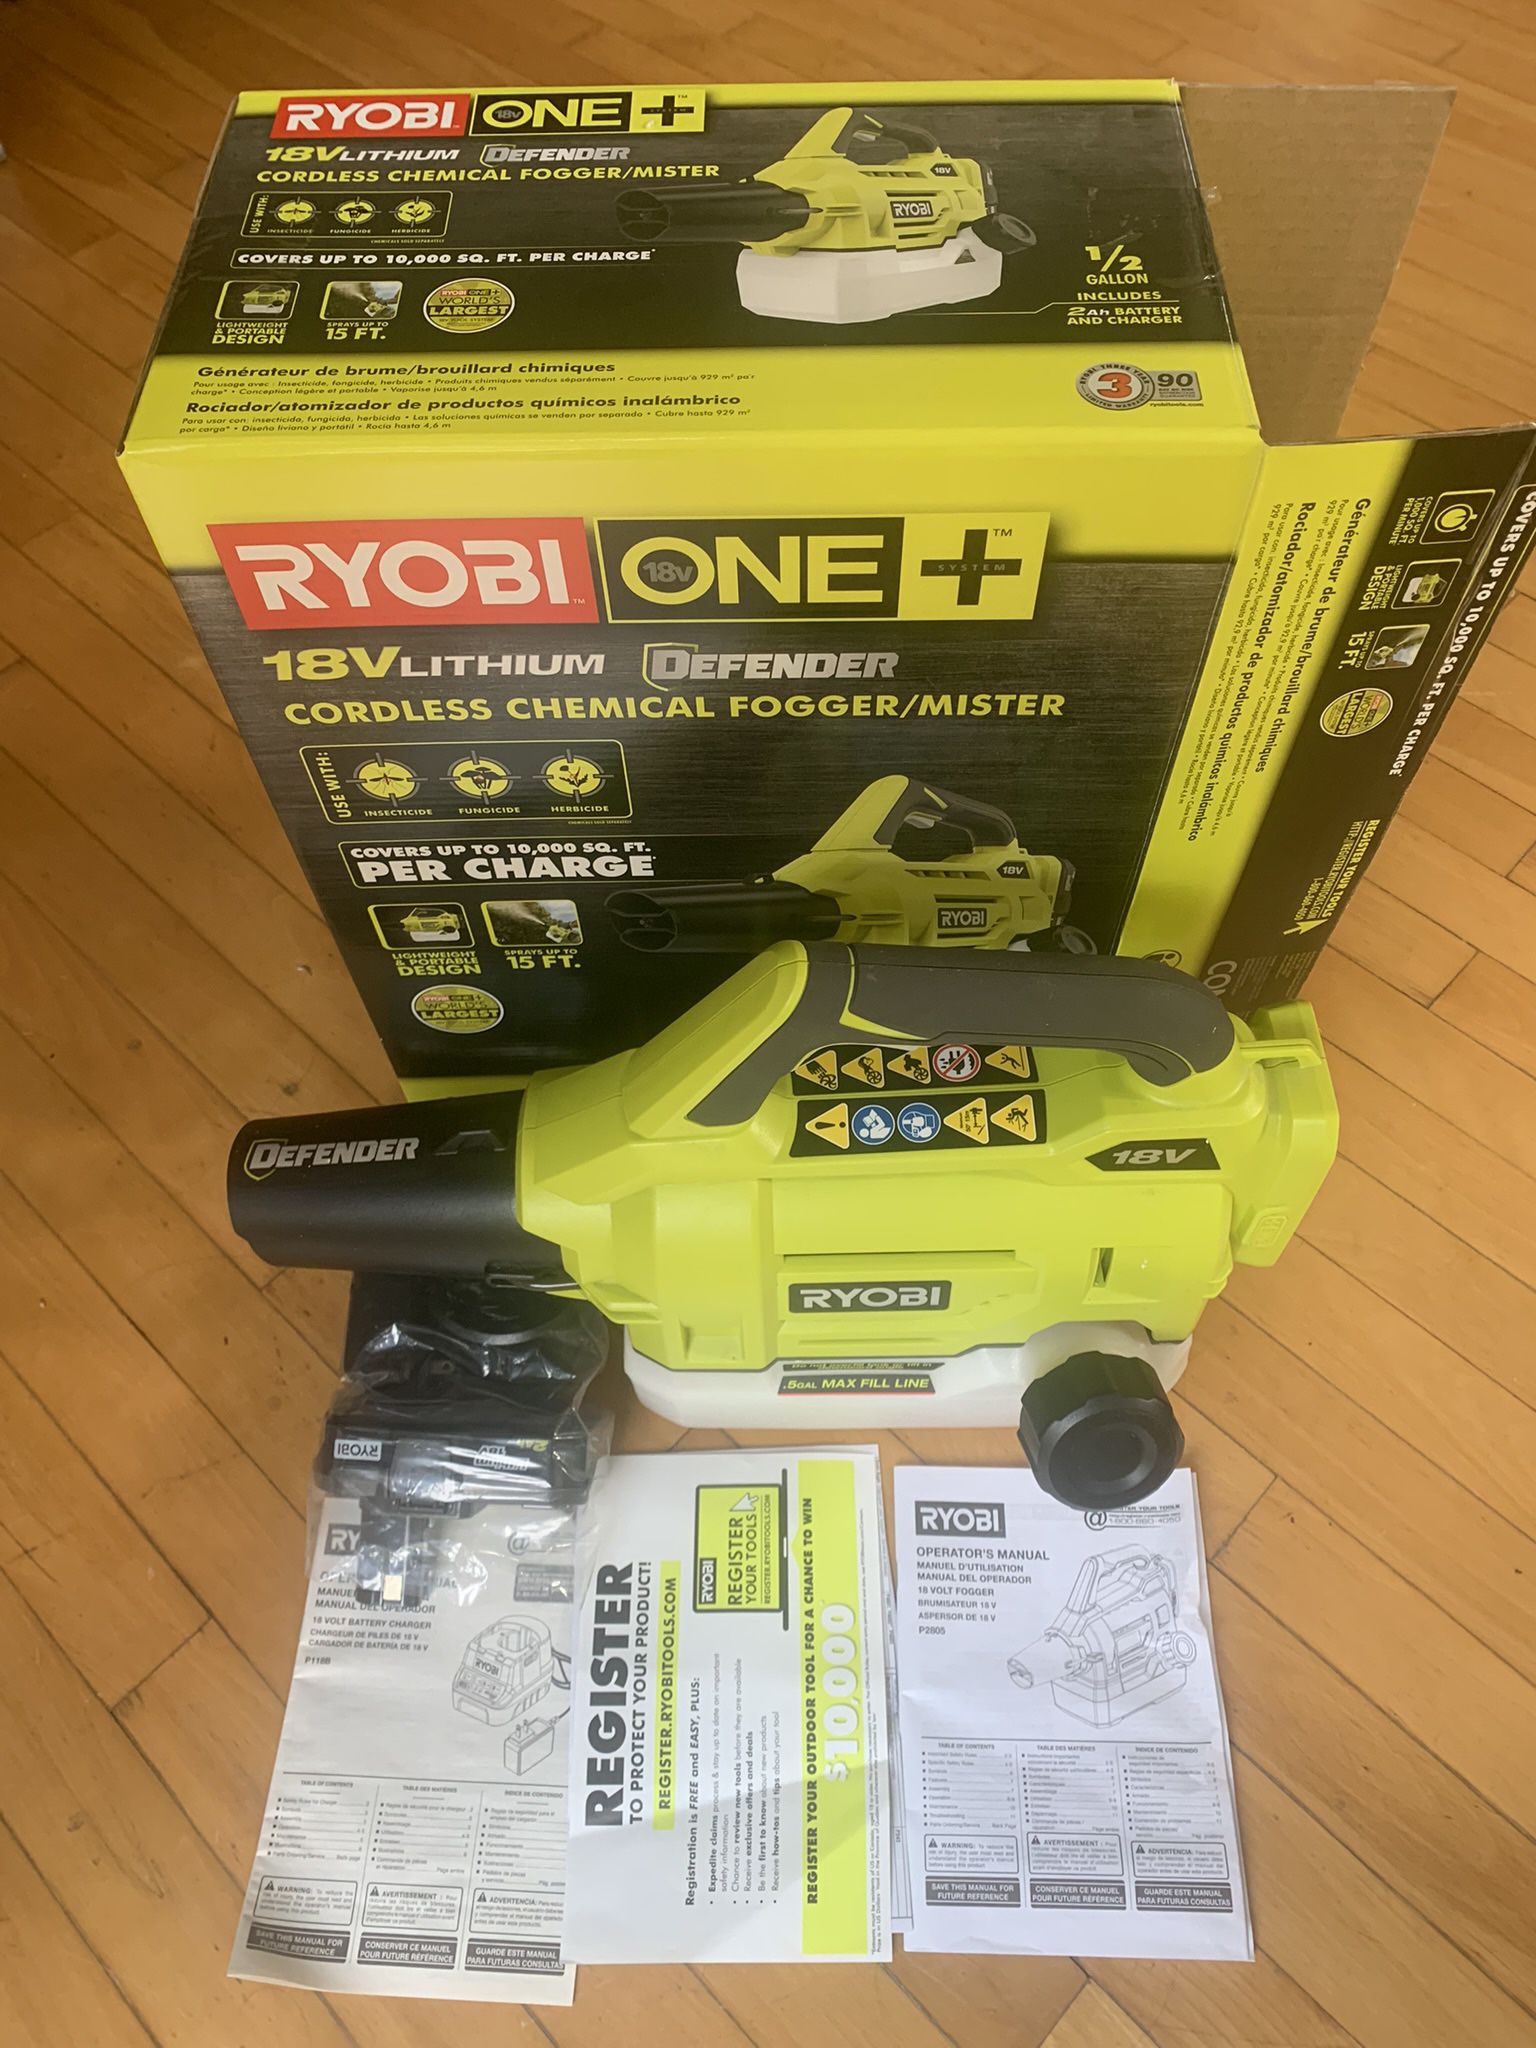 Ryobi ONE+ 18V Cordless 0.5 Gallon Sprayer Pest Insects Indoor Outdoor + 2.0 Ah Battery & Charger + Manual Box ECU